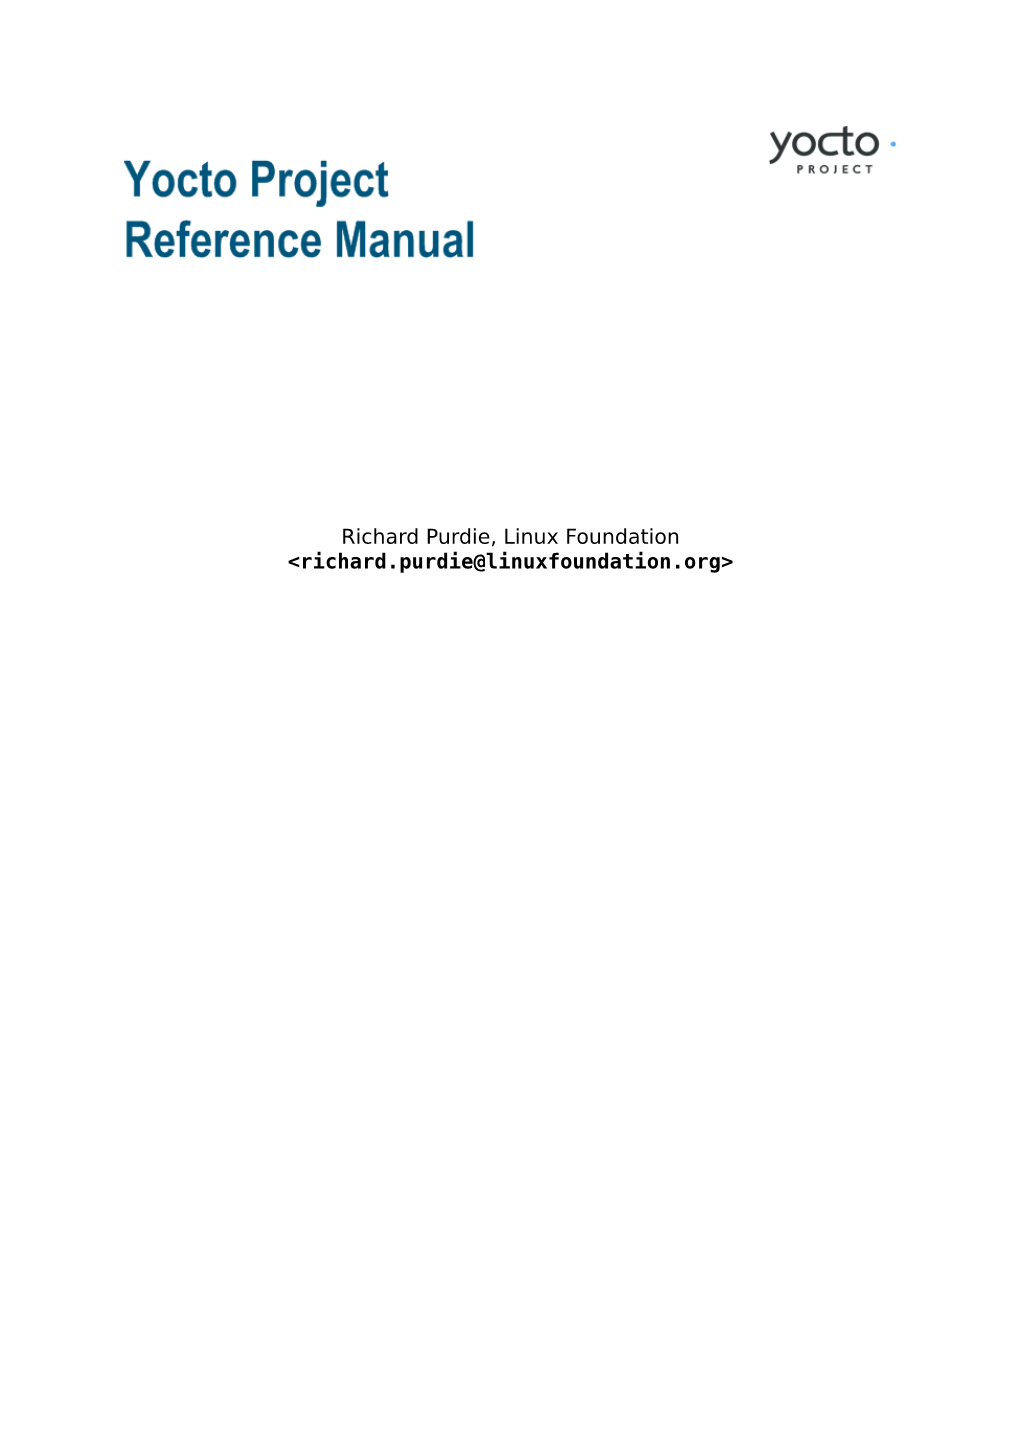 Yocto Project Reference Manual [ from the Yocto Project Website